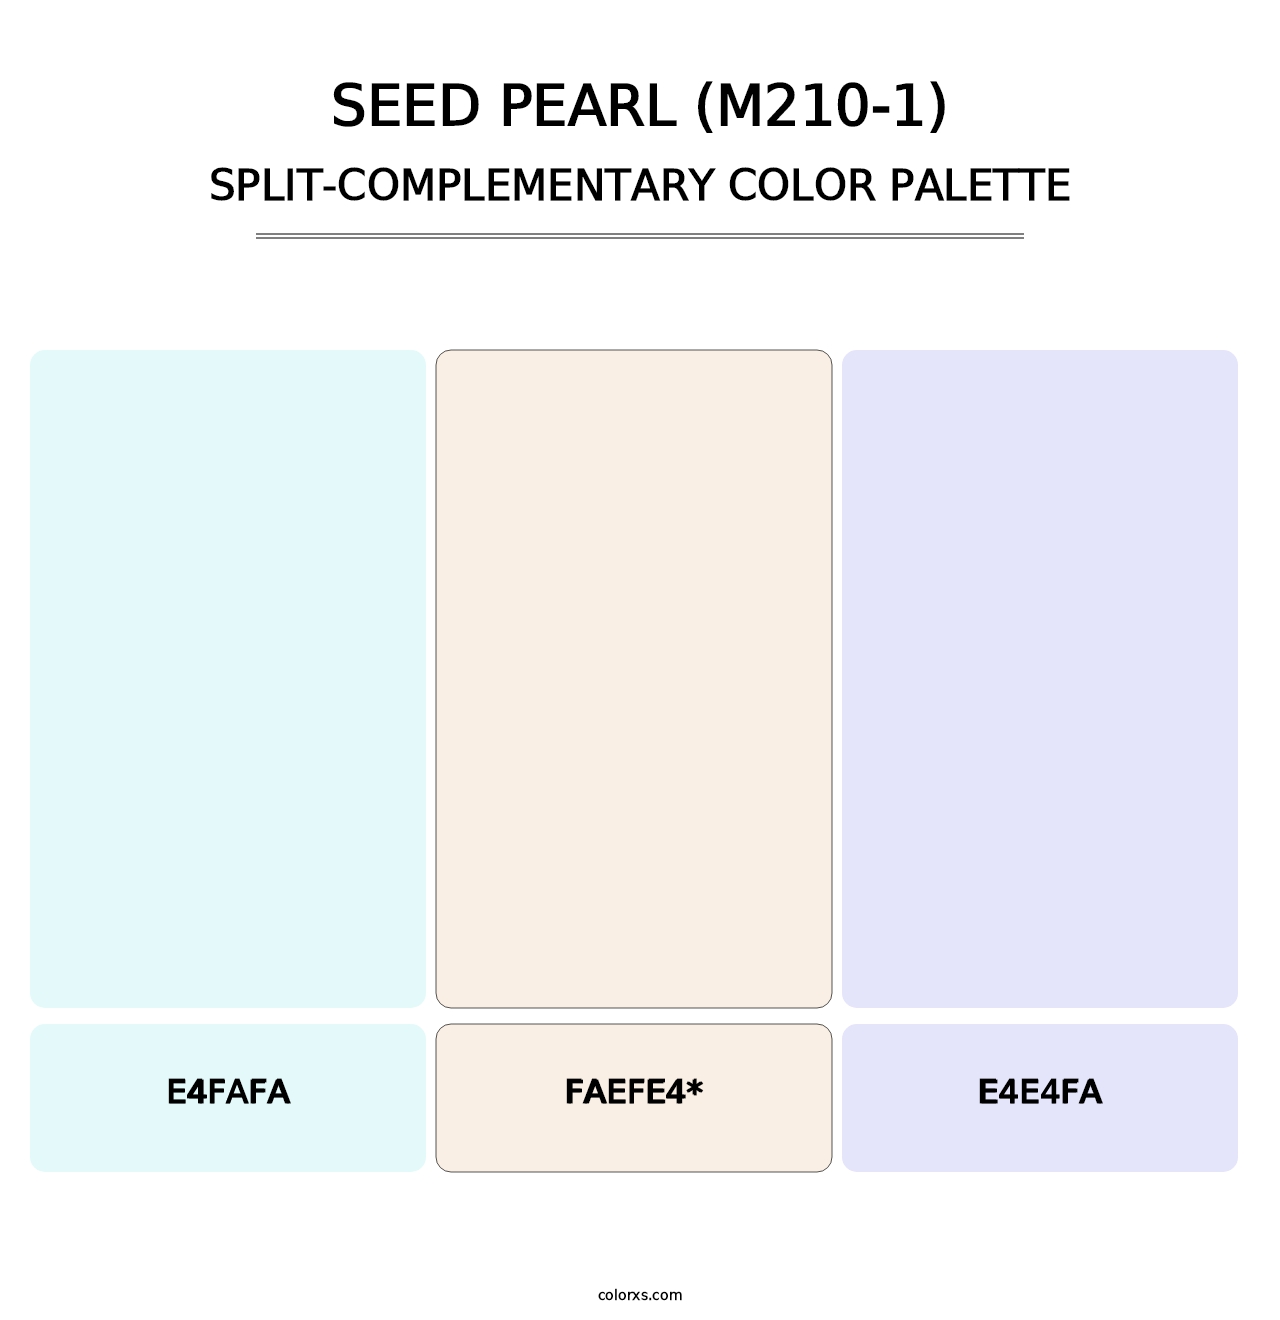 Seed Pearl (M210-1) - Split-Complementary Color Palette